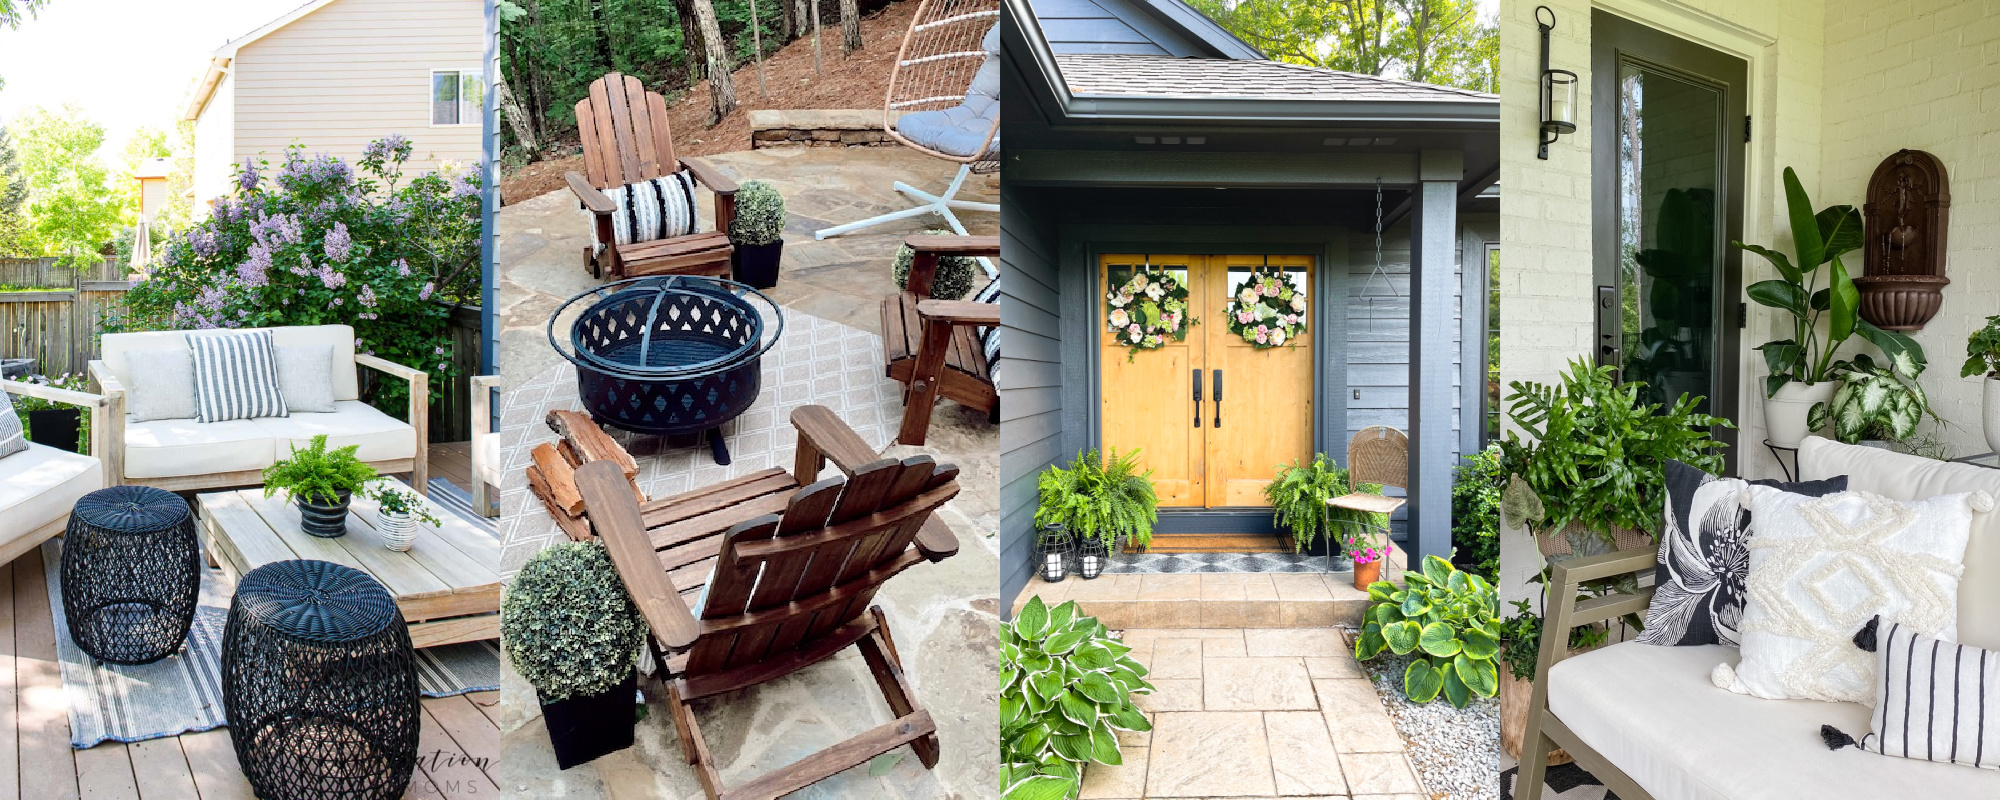  Family Patio Ideas by popular Alabama life and style blog, She Gave It A Go: collage image of patios with wooden patio furniture, natural color area rugs, and a fire pit. 